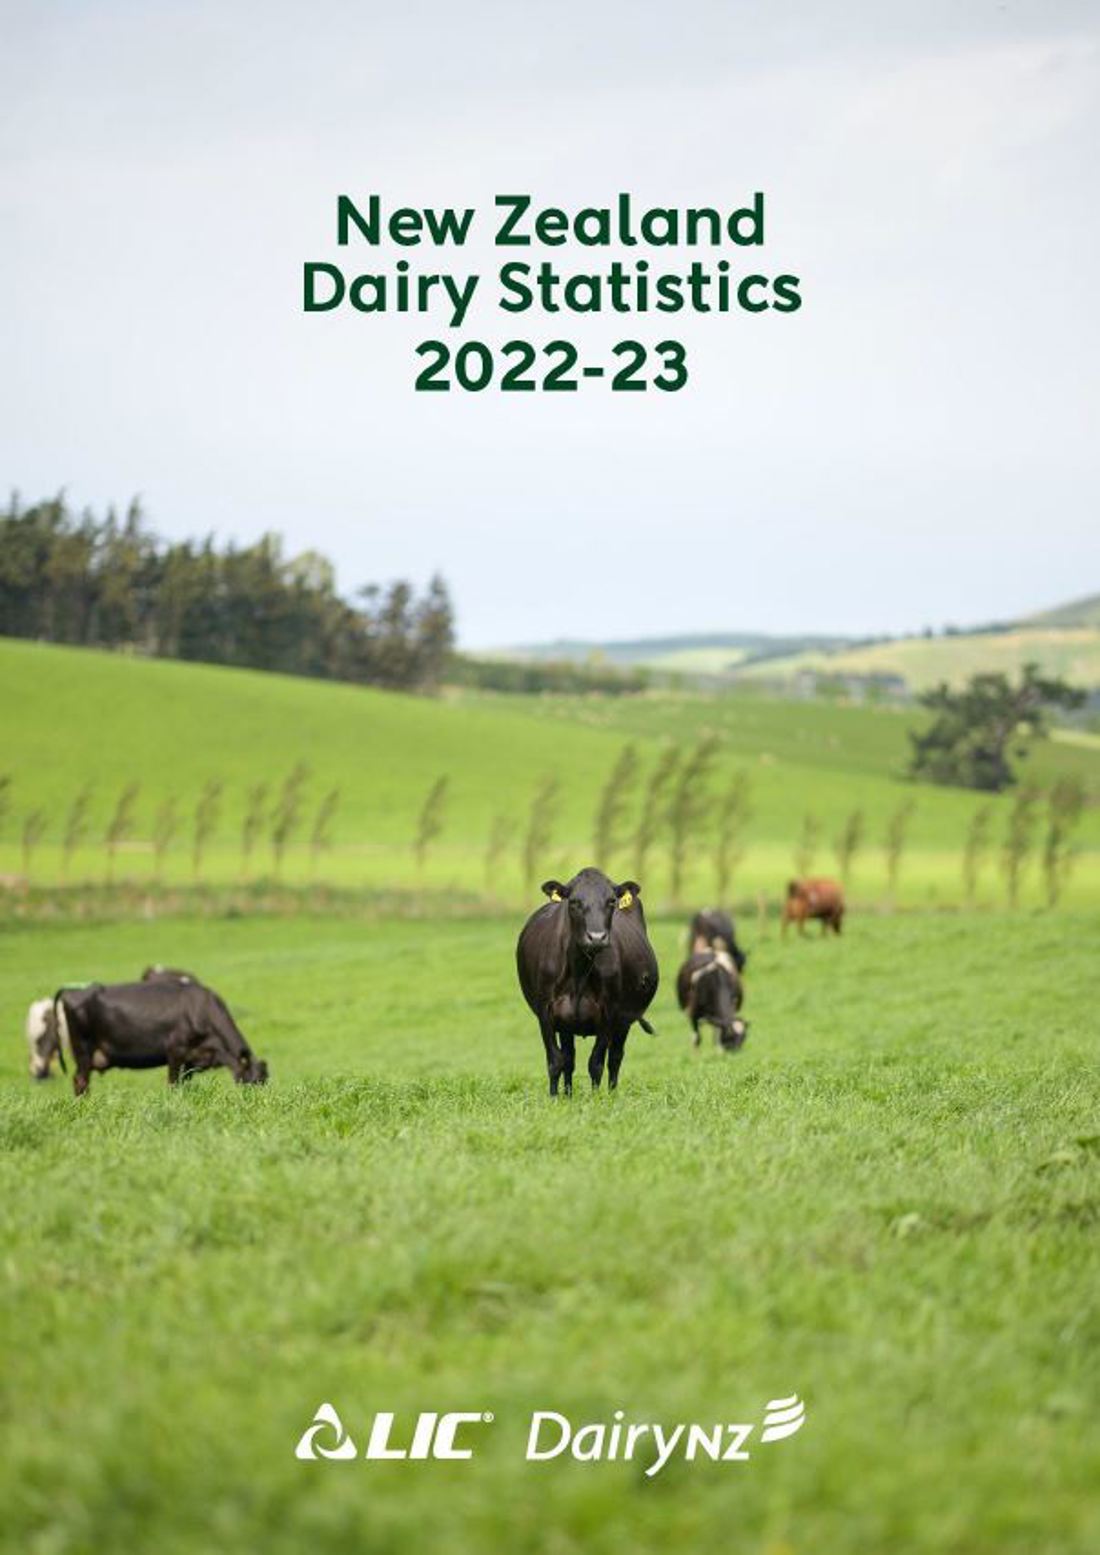 Nz Dairy Stats 2022 23 Cover Image